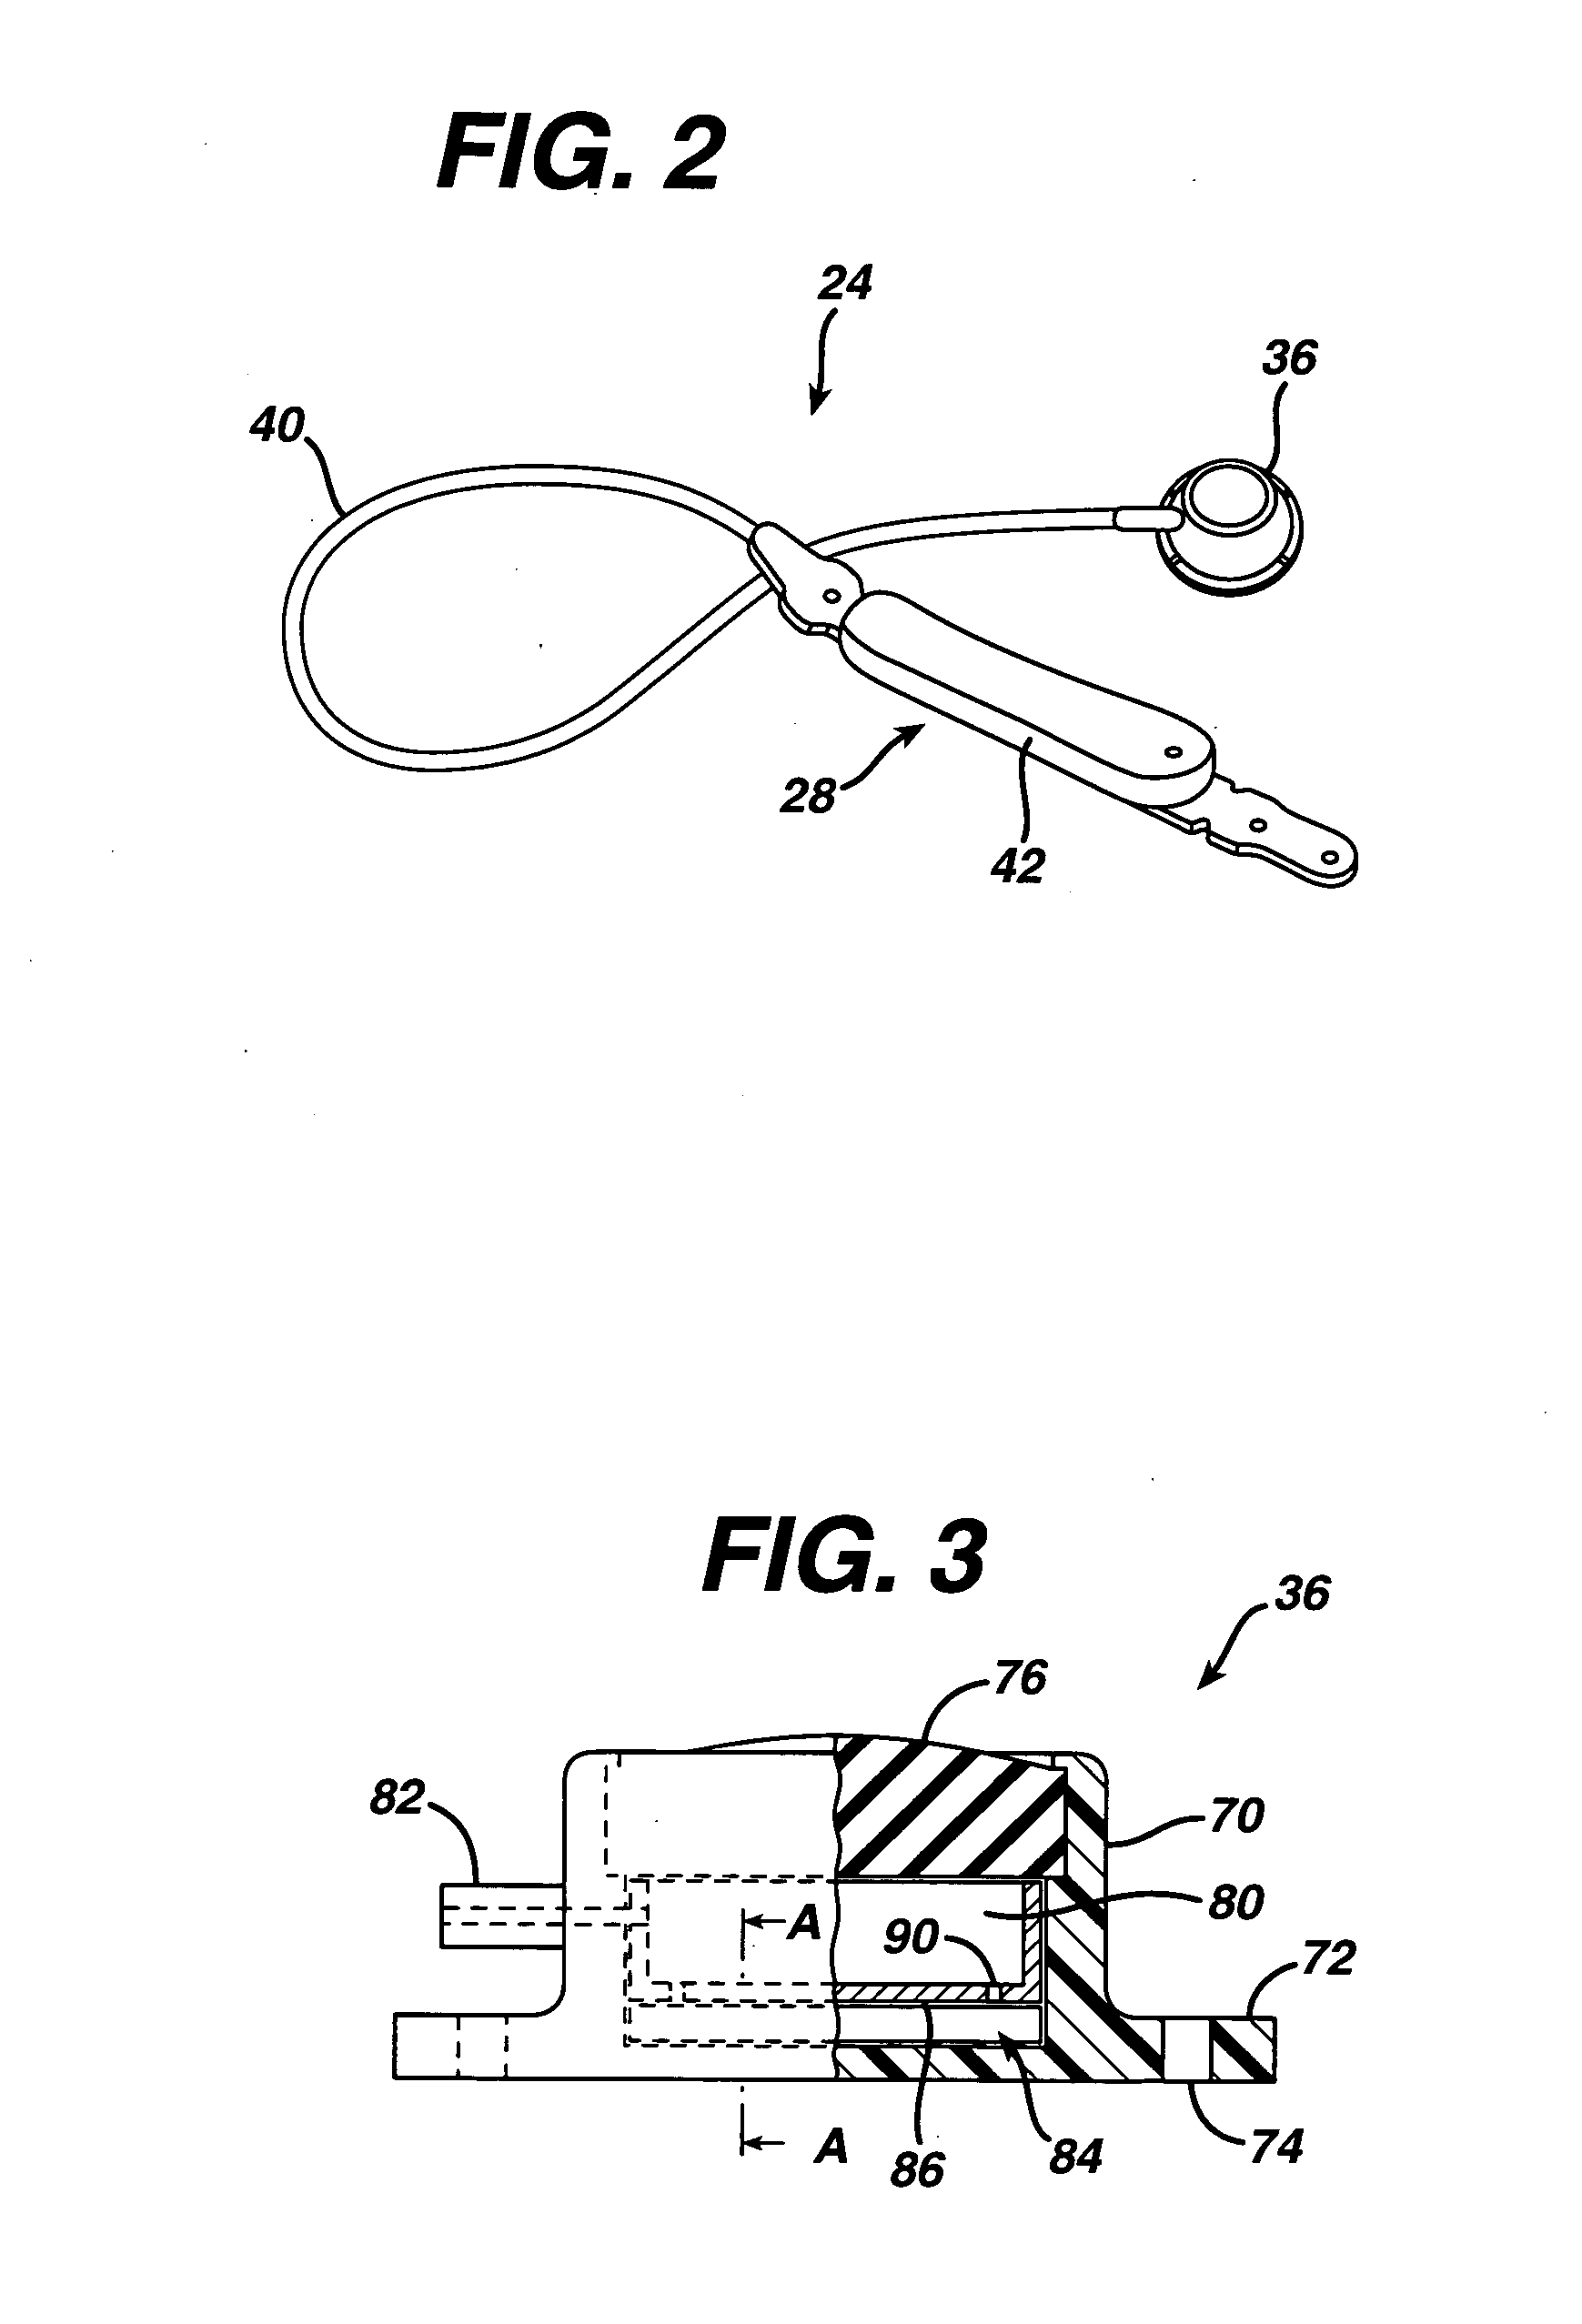 Remote monitoring and adjustment of a food intake restriction device